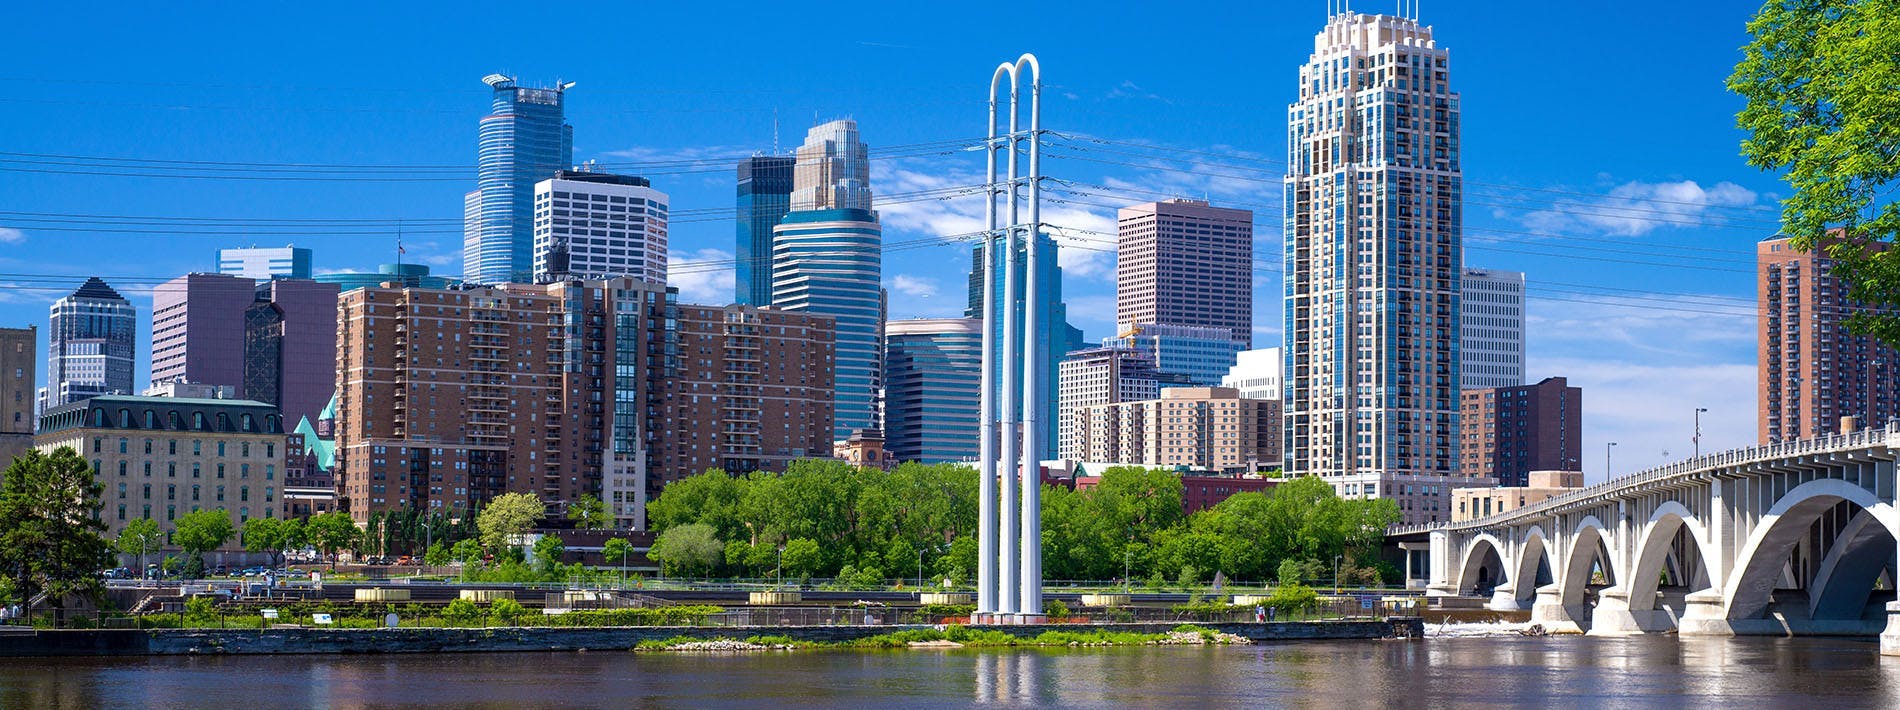 Drinking the Mississippi: Examining Minneapolis Water Quality